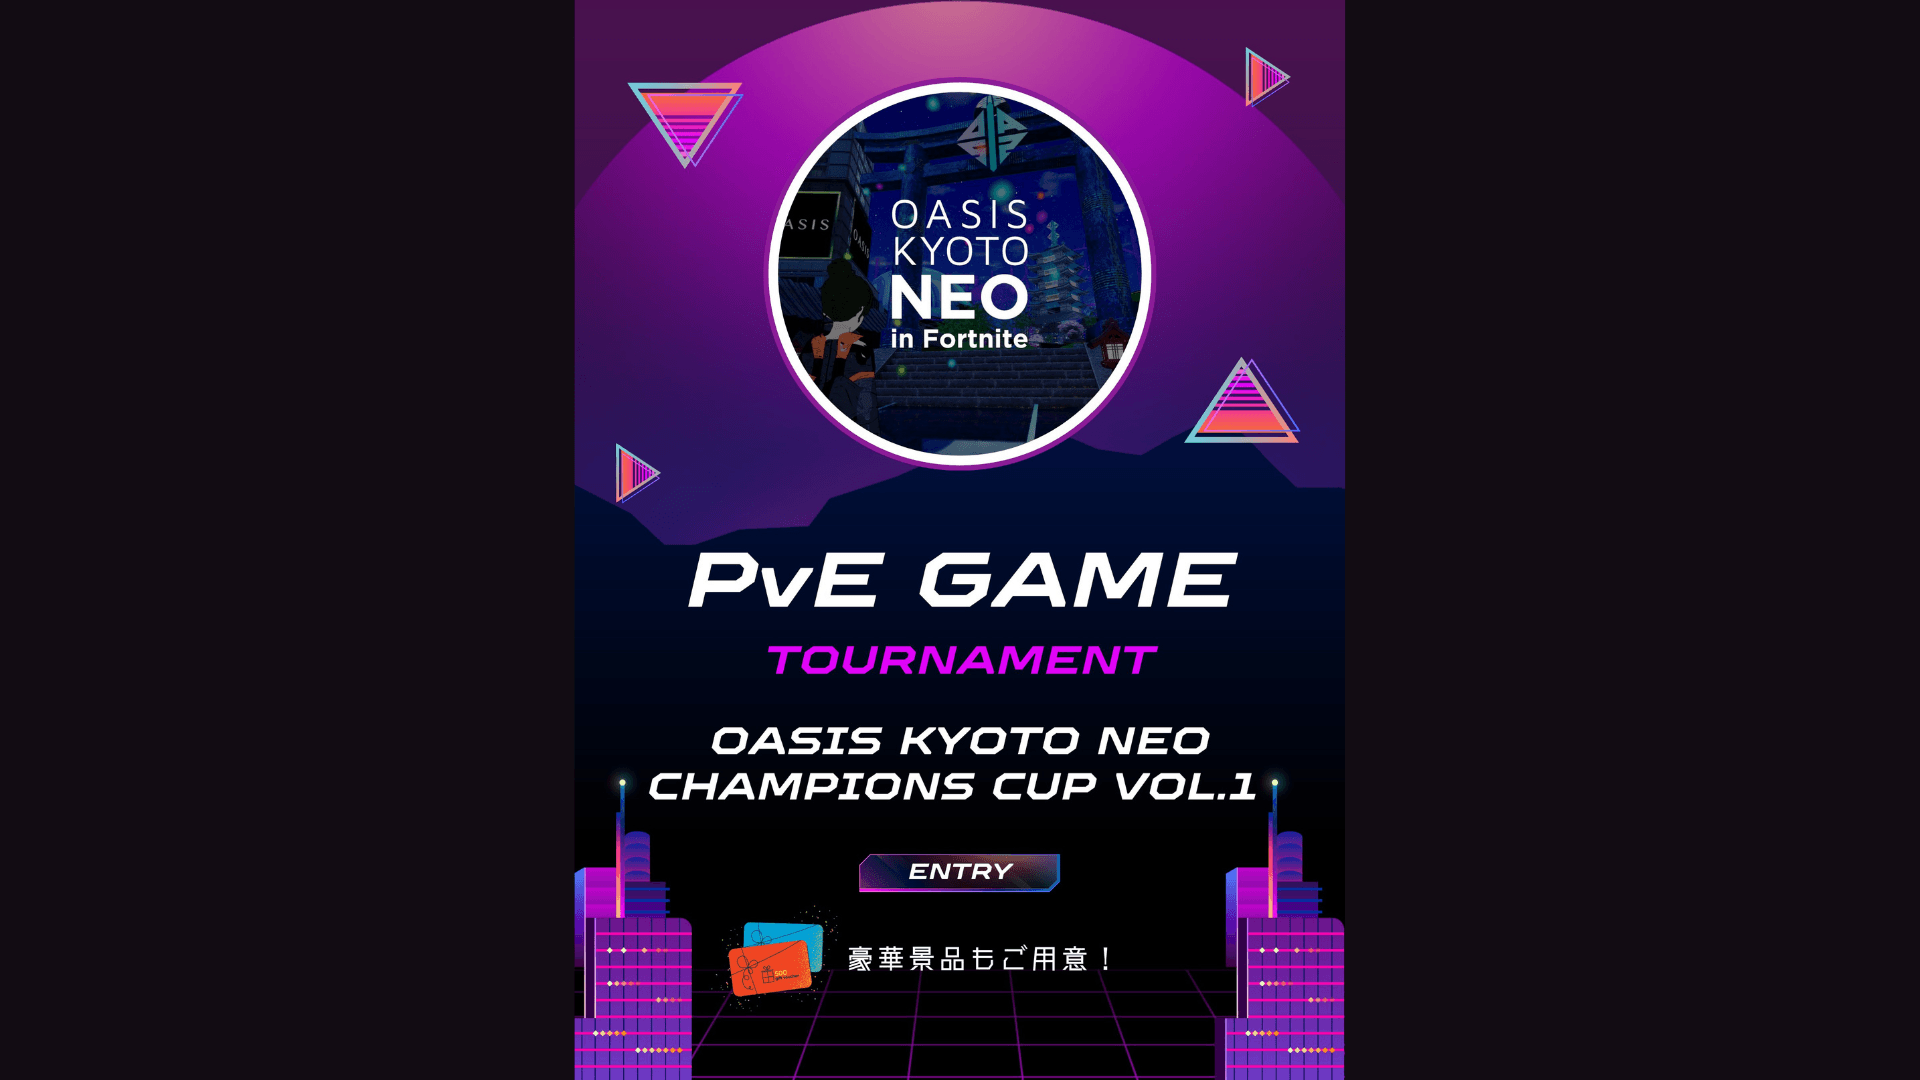 OASIS KYOTO NEO CHAMPIONS CUP Vol.1 in Fortniteの見出し画像